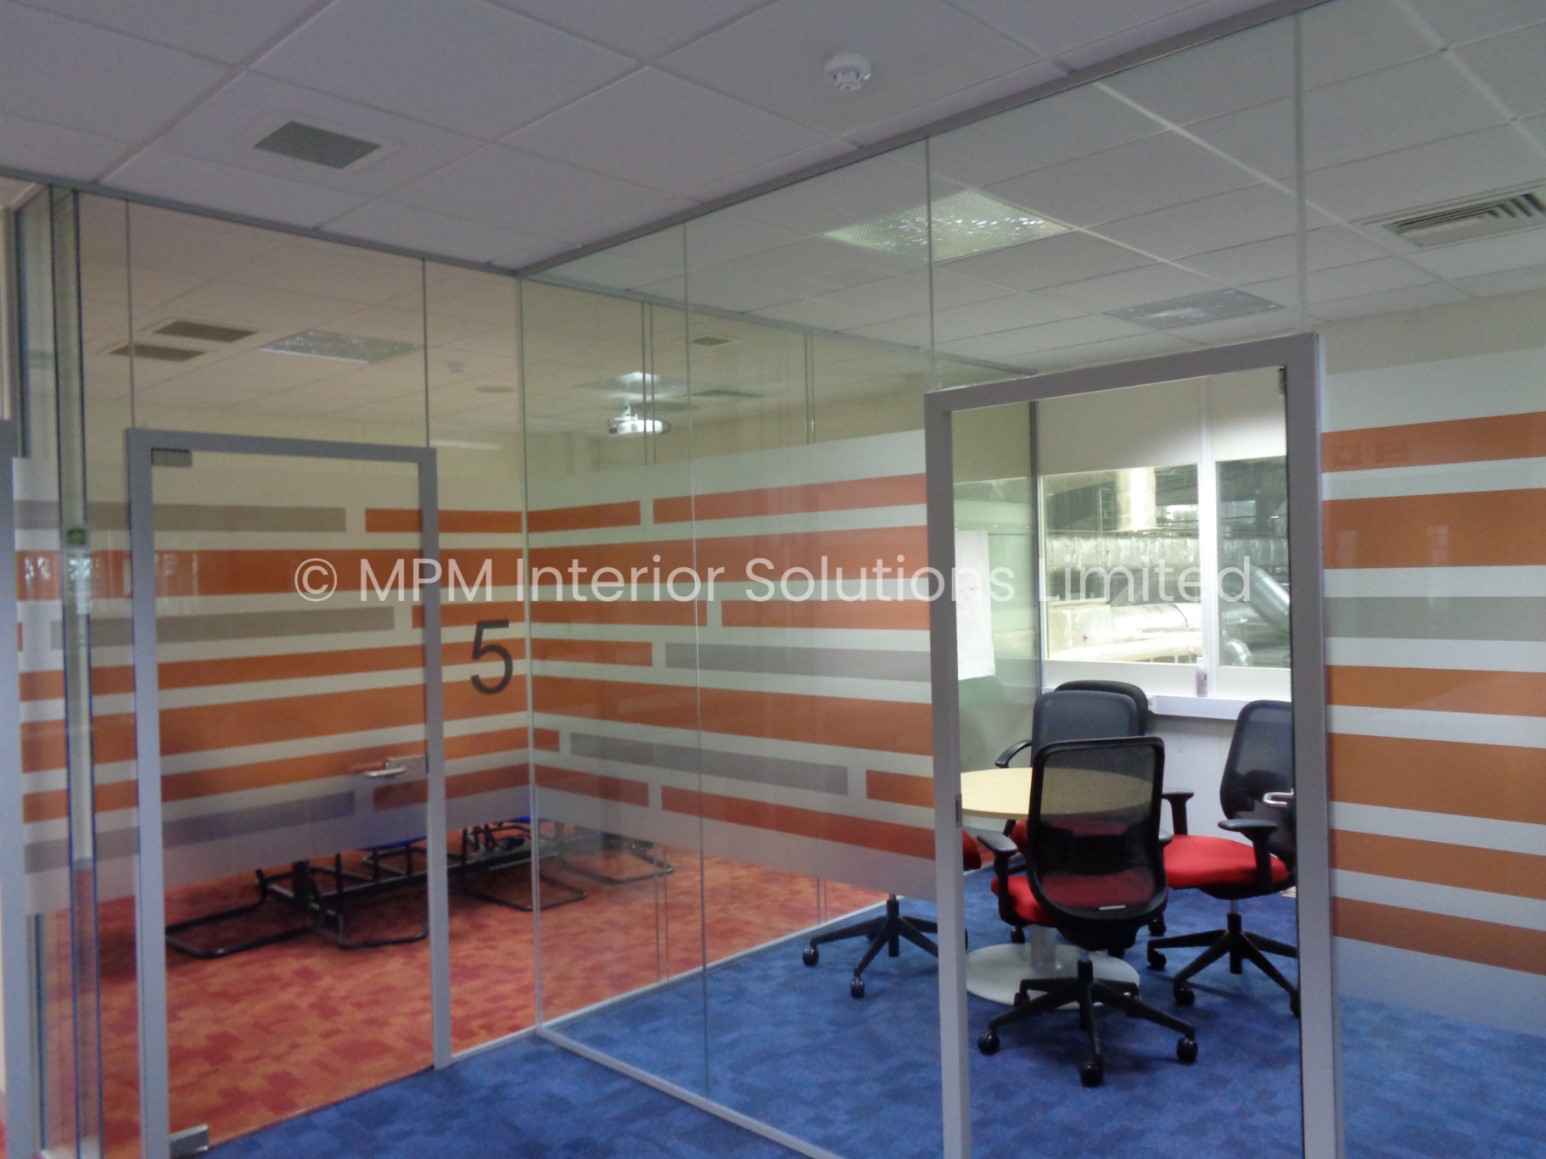 Frameless Glass Office Partitioning, Edwards Ltd (Burgess Hill, West Sussex), MPM Interior Solutions Limited